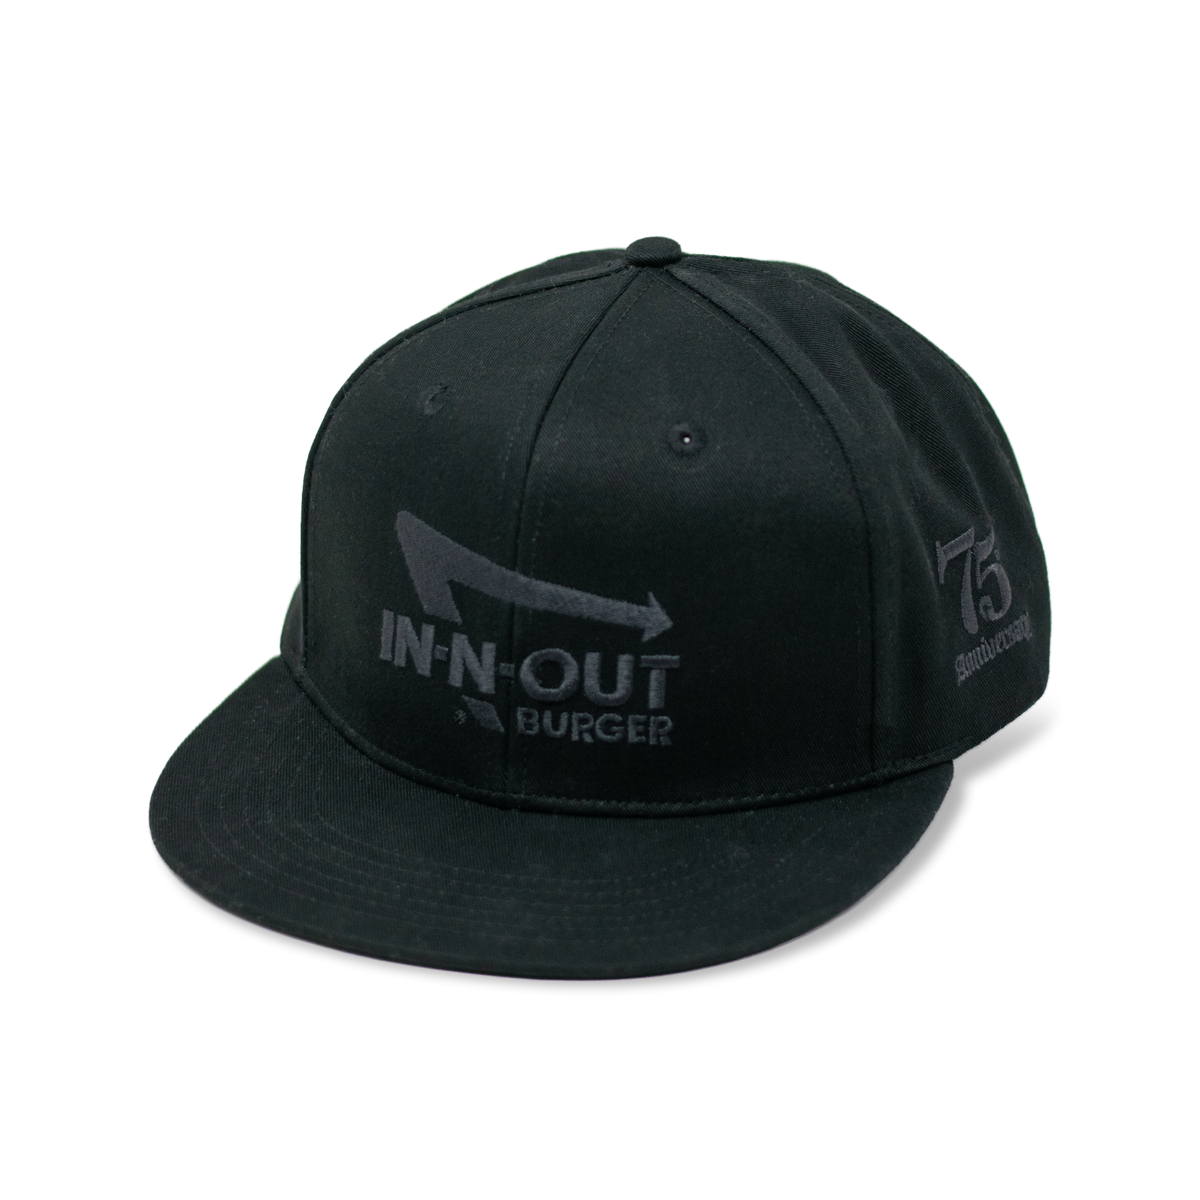 75th Anniversary Flat Bill Black Hat – In-N-Out Burger Company Store